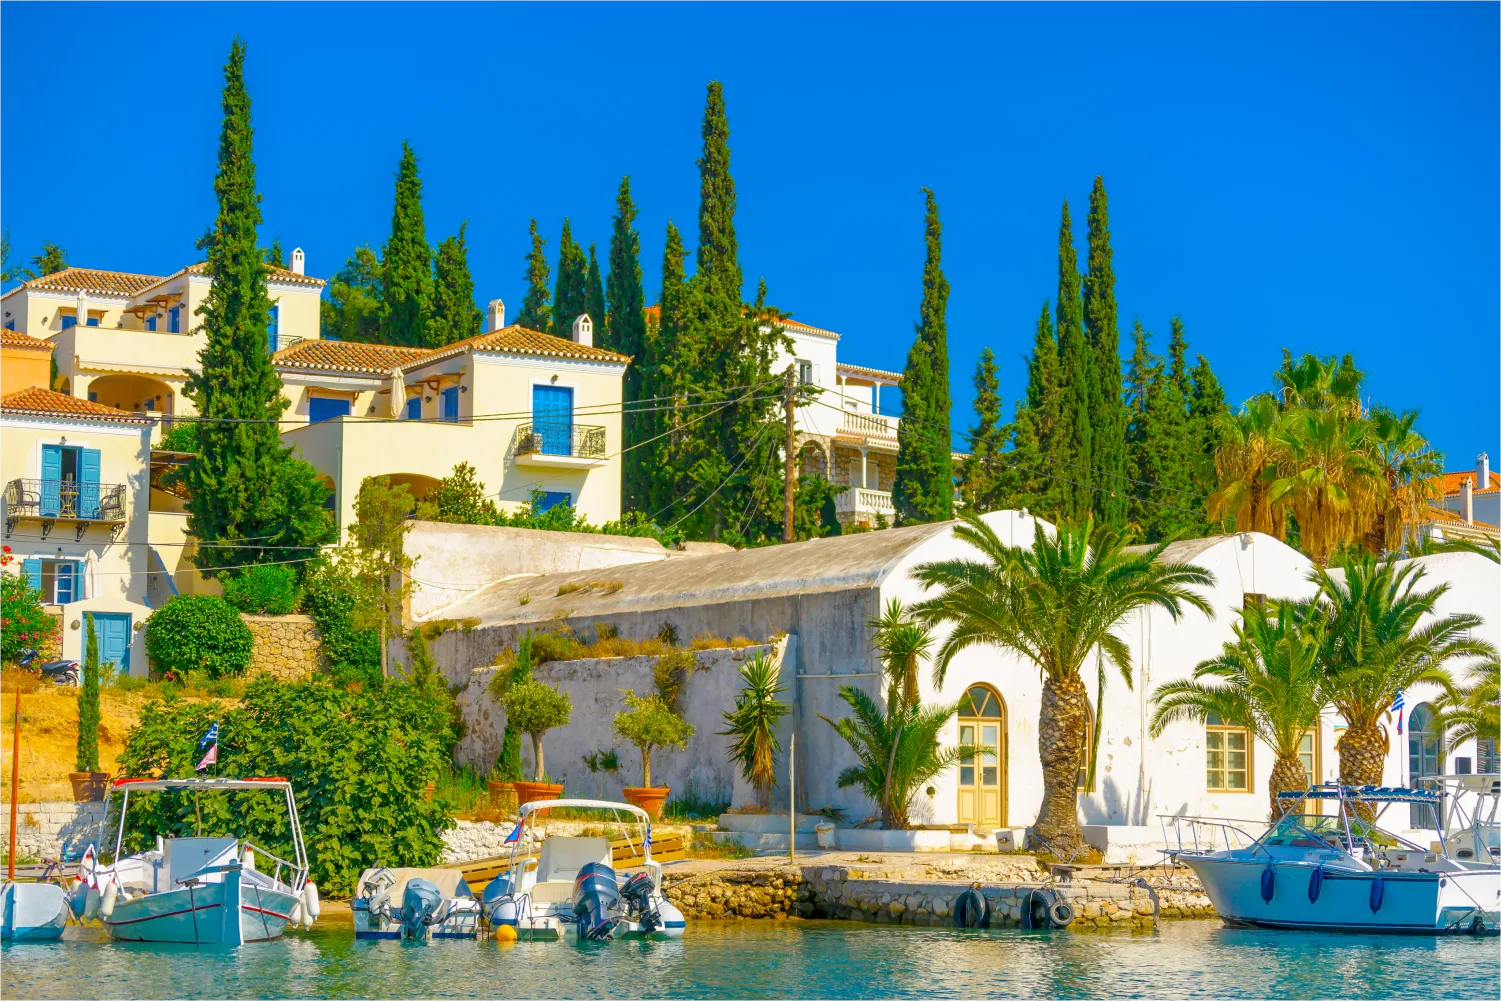 The Old Port Of Spetses with its tall trees and traditional houses